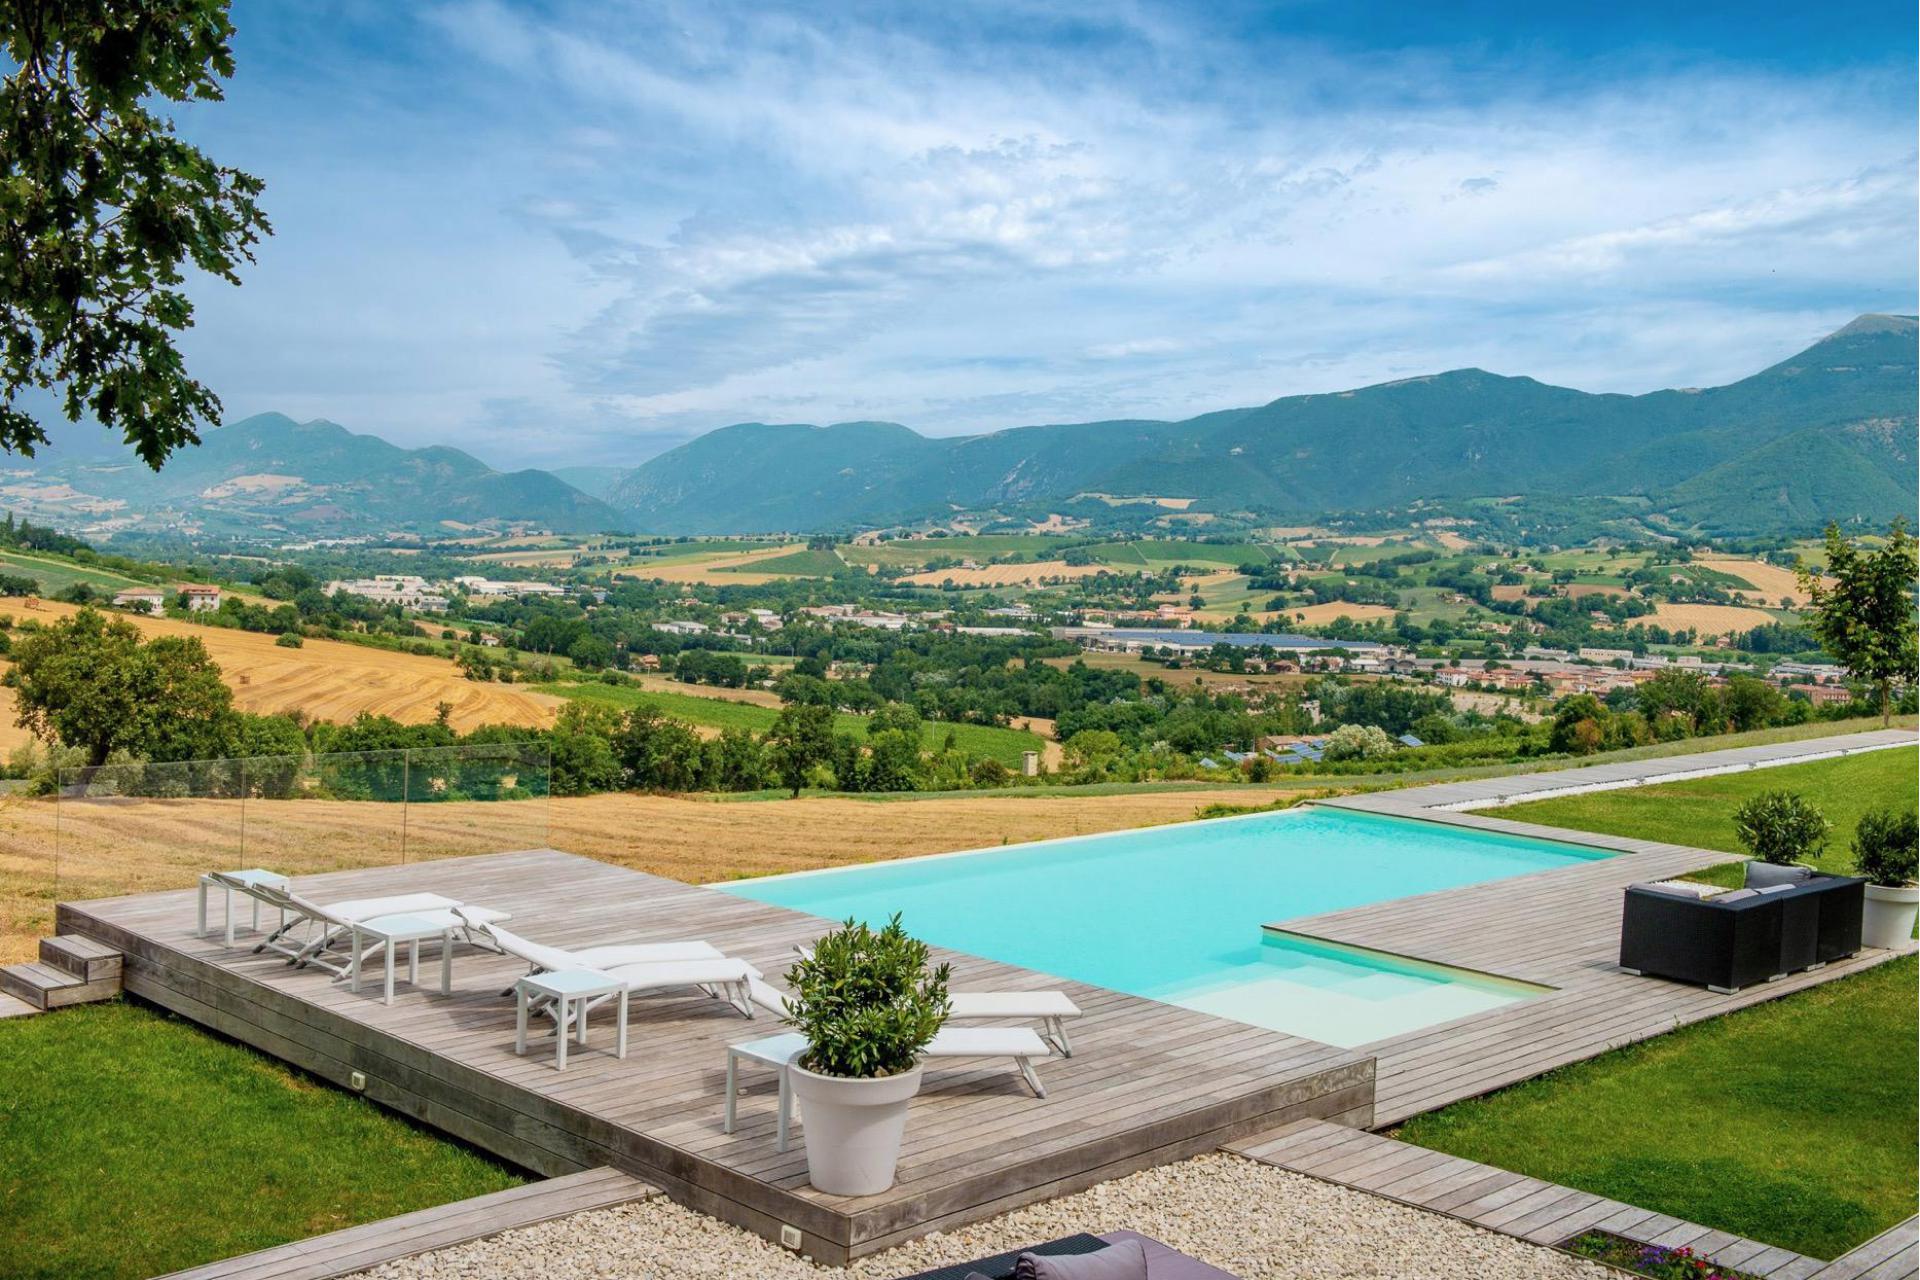 3. Oasis of tranquillity in the countryside of Le Marche